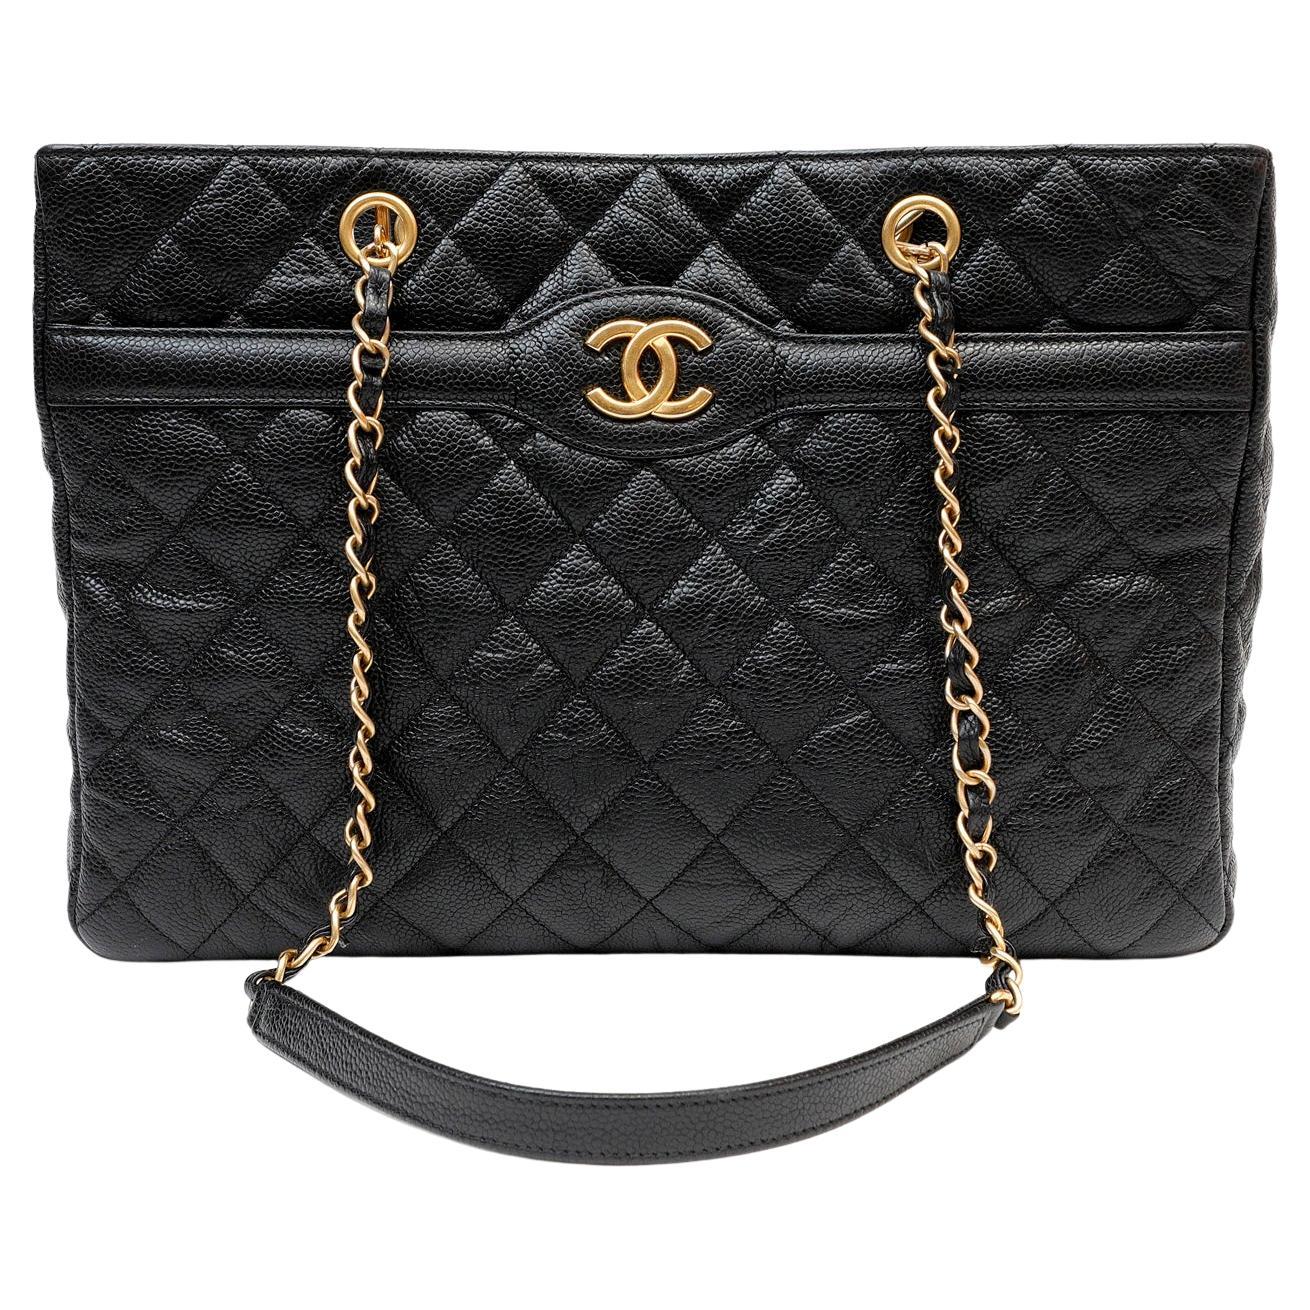 How much is the Chanel Deauville tote?